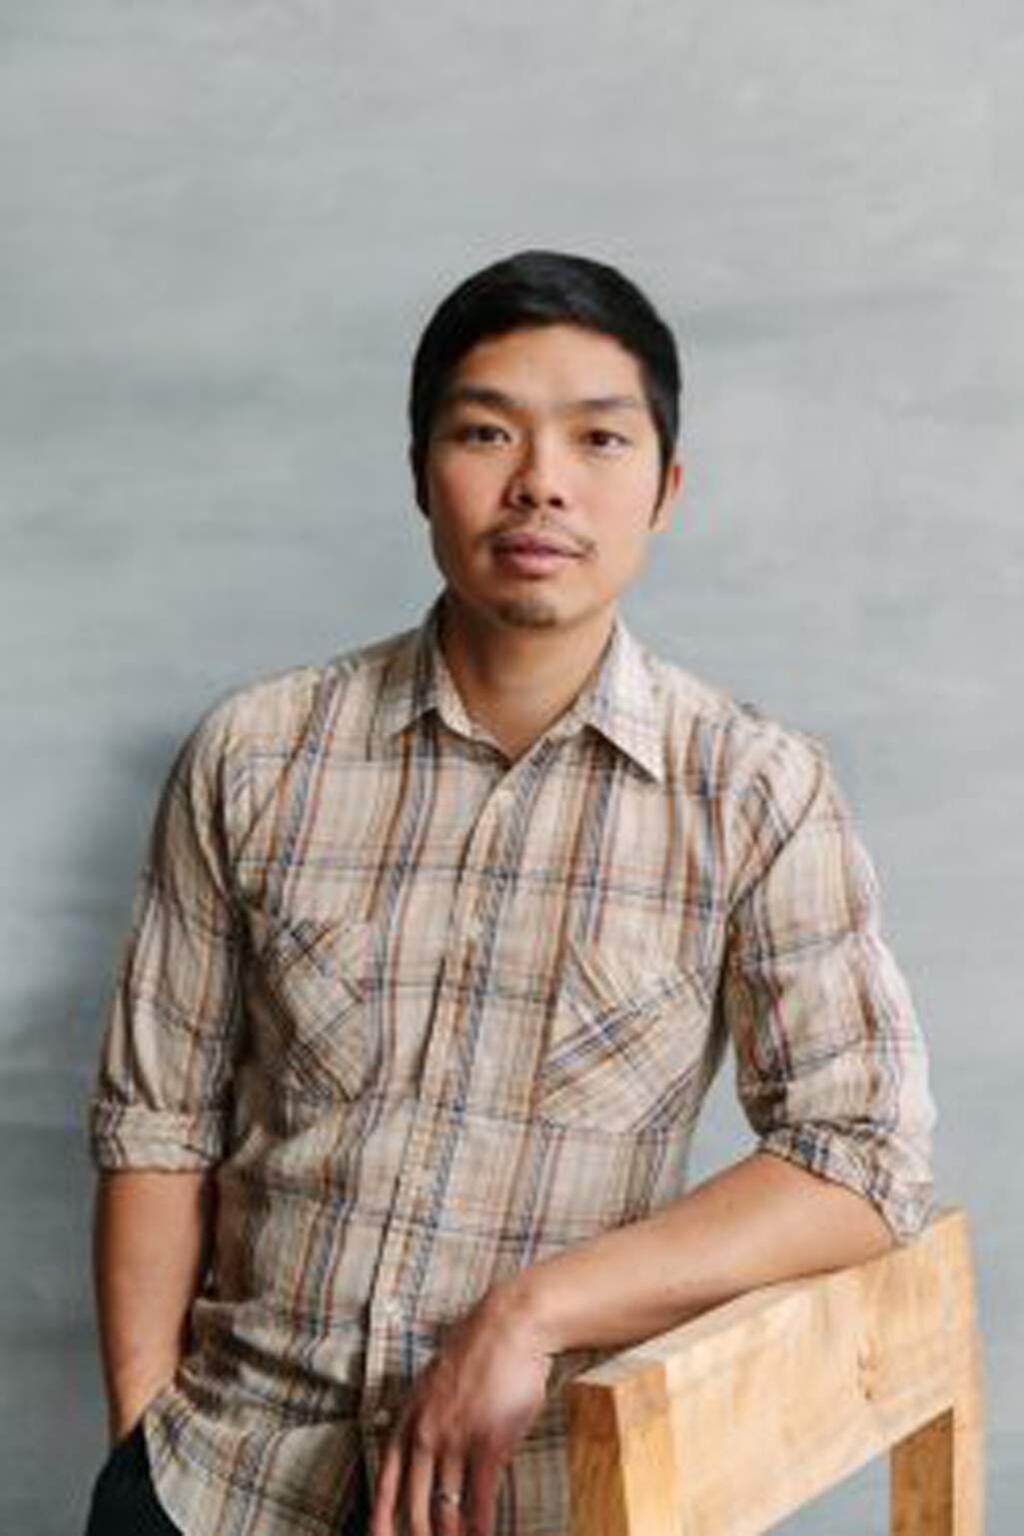 Chef Anthony Myint of Mission Chinese Food in San Francisco. (HEALDSBURG SHED)